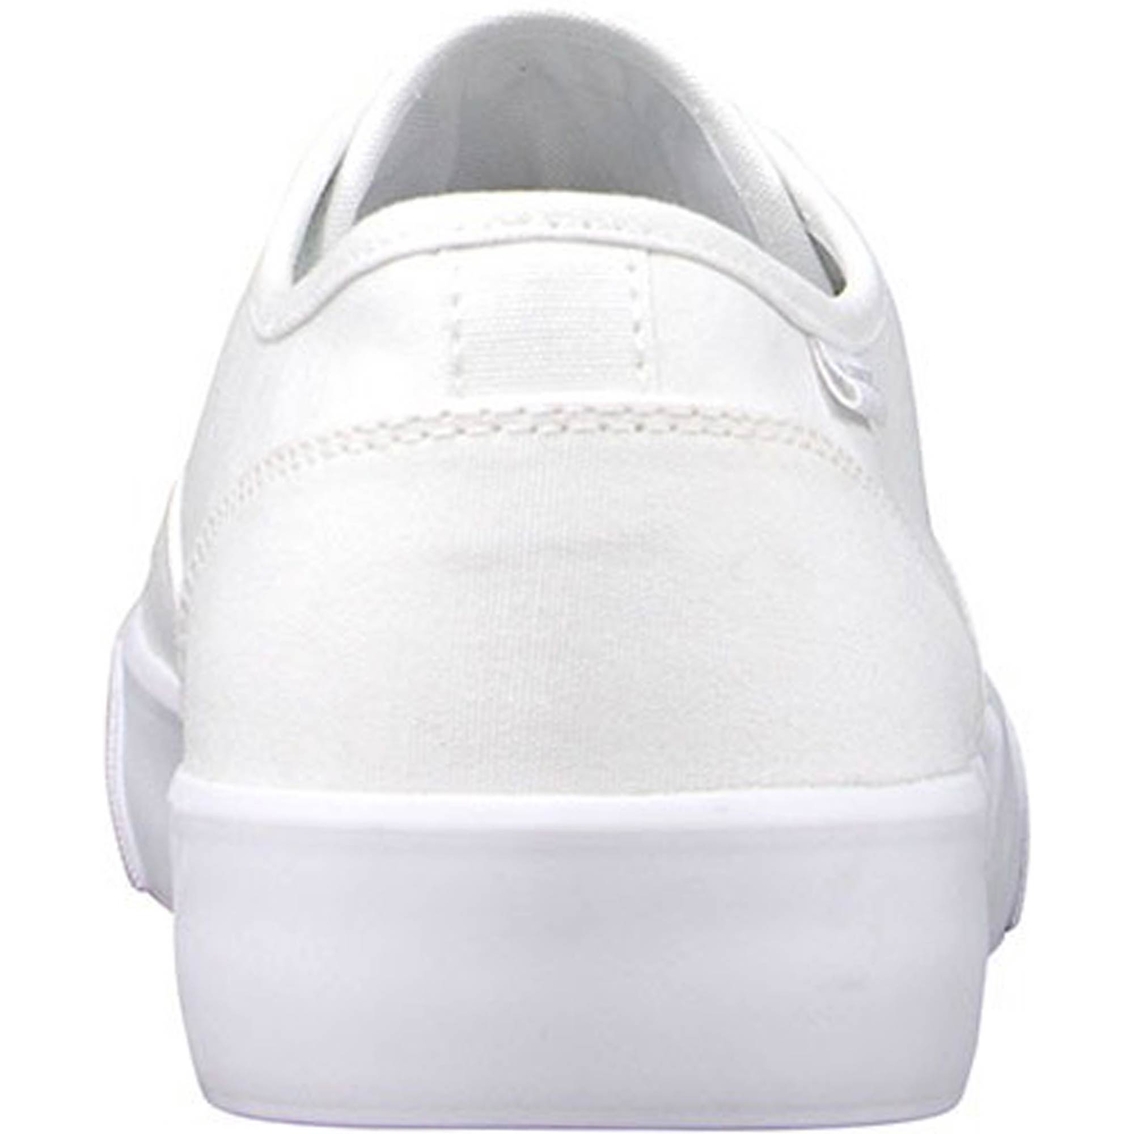 Lugz Men's Lear Sneakers - Image 5 of 7